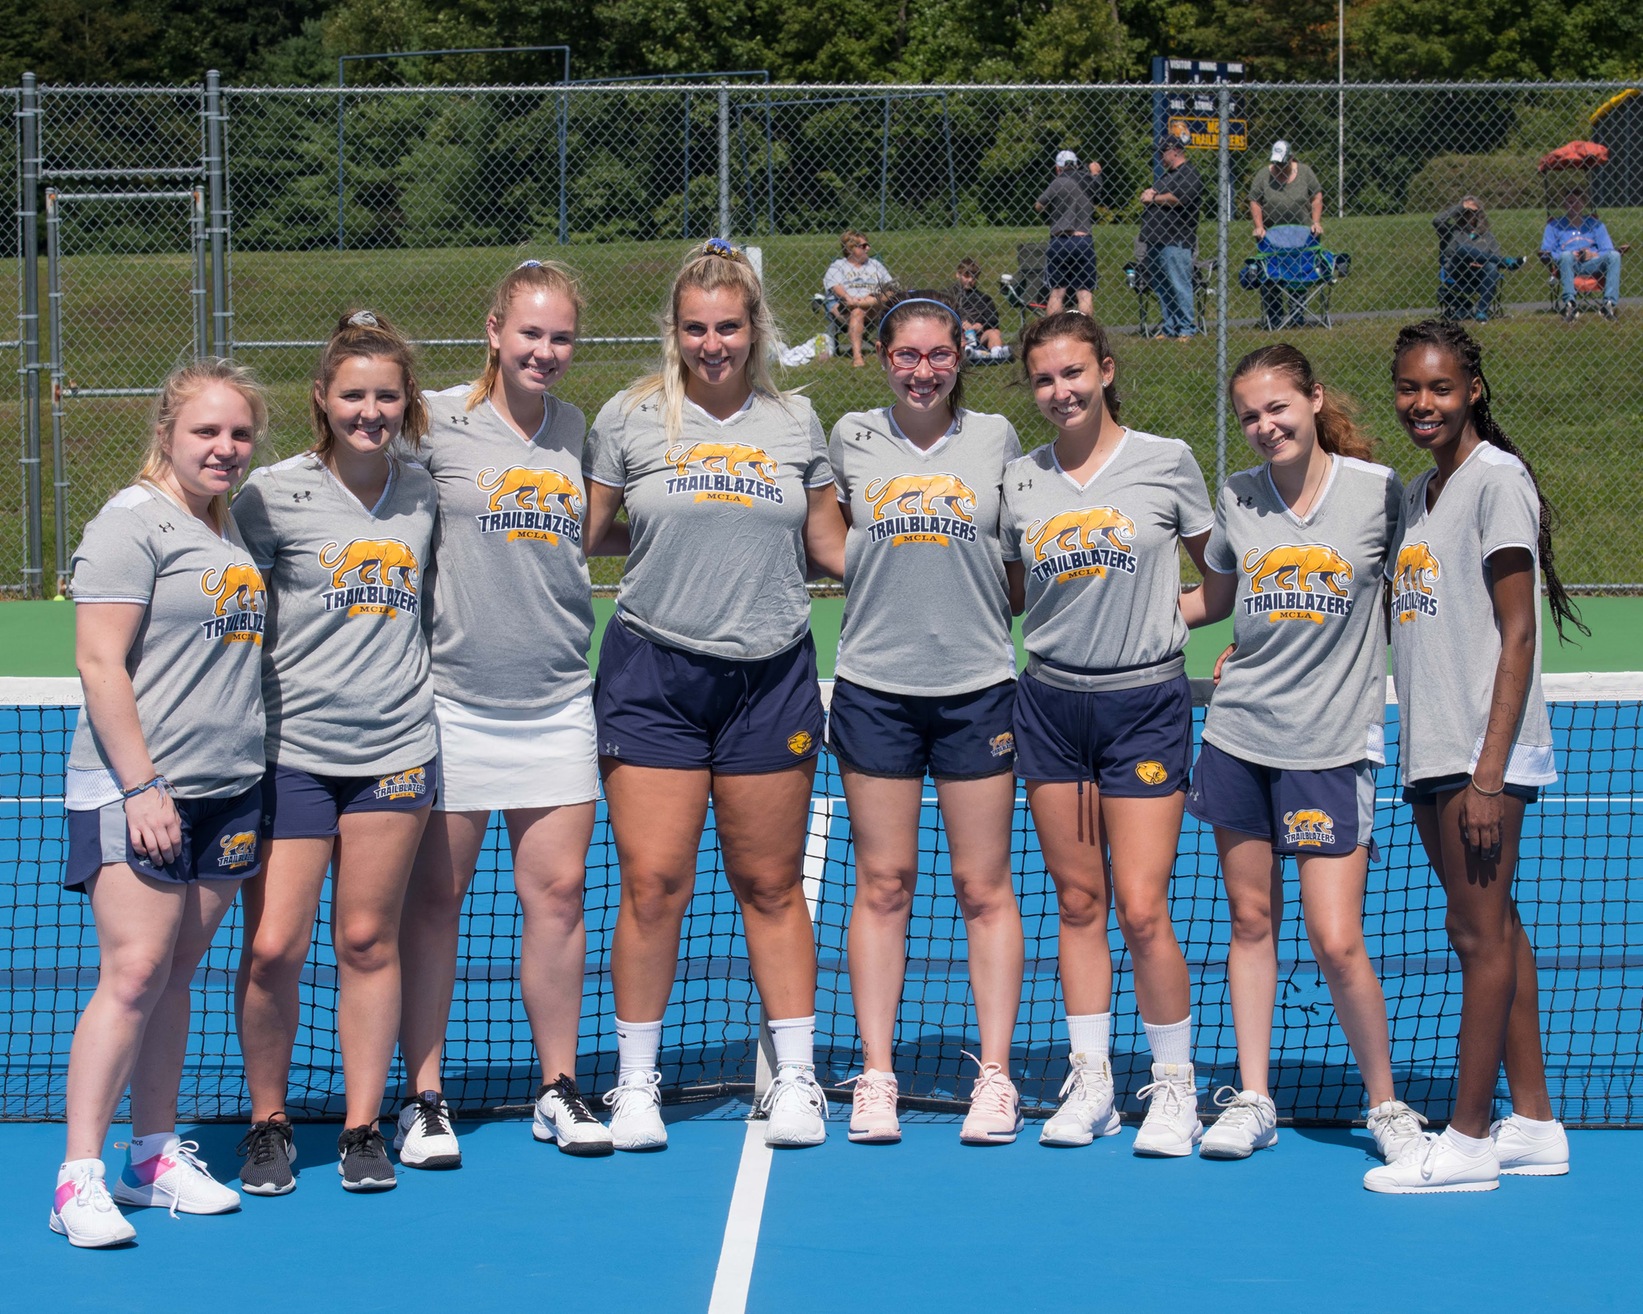 Tennis preps for NAC Championships with 6-3 win over NVU-Johnson